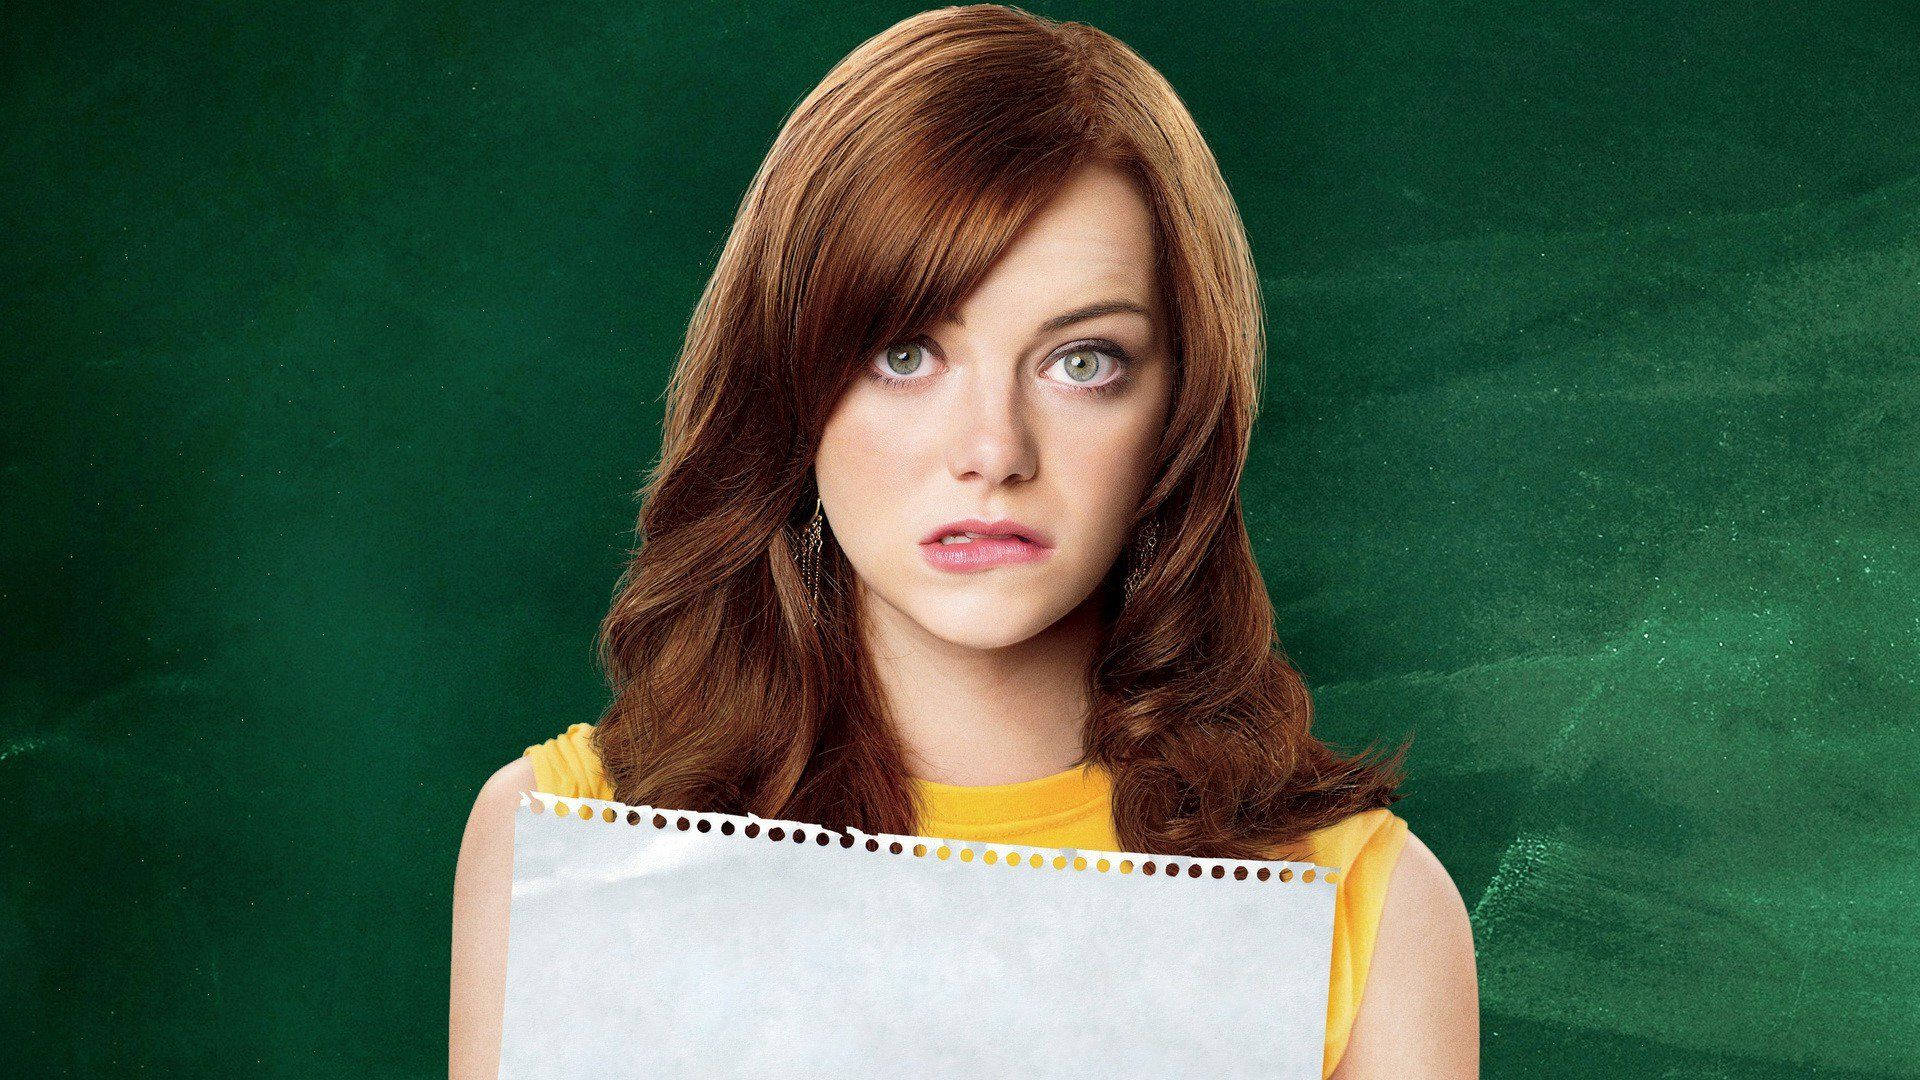 Emma Stone stars as Olive Penderghast in the romantic comedy "Easy A" Wallpaper